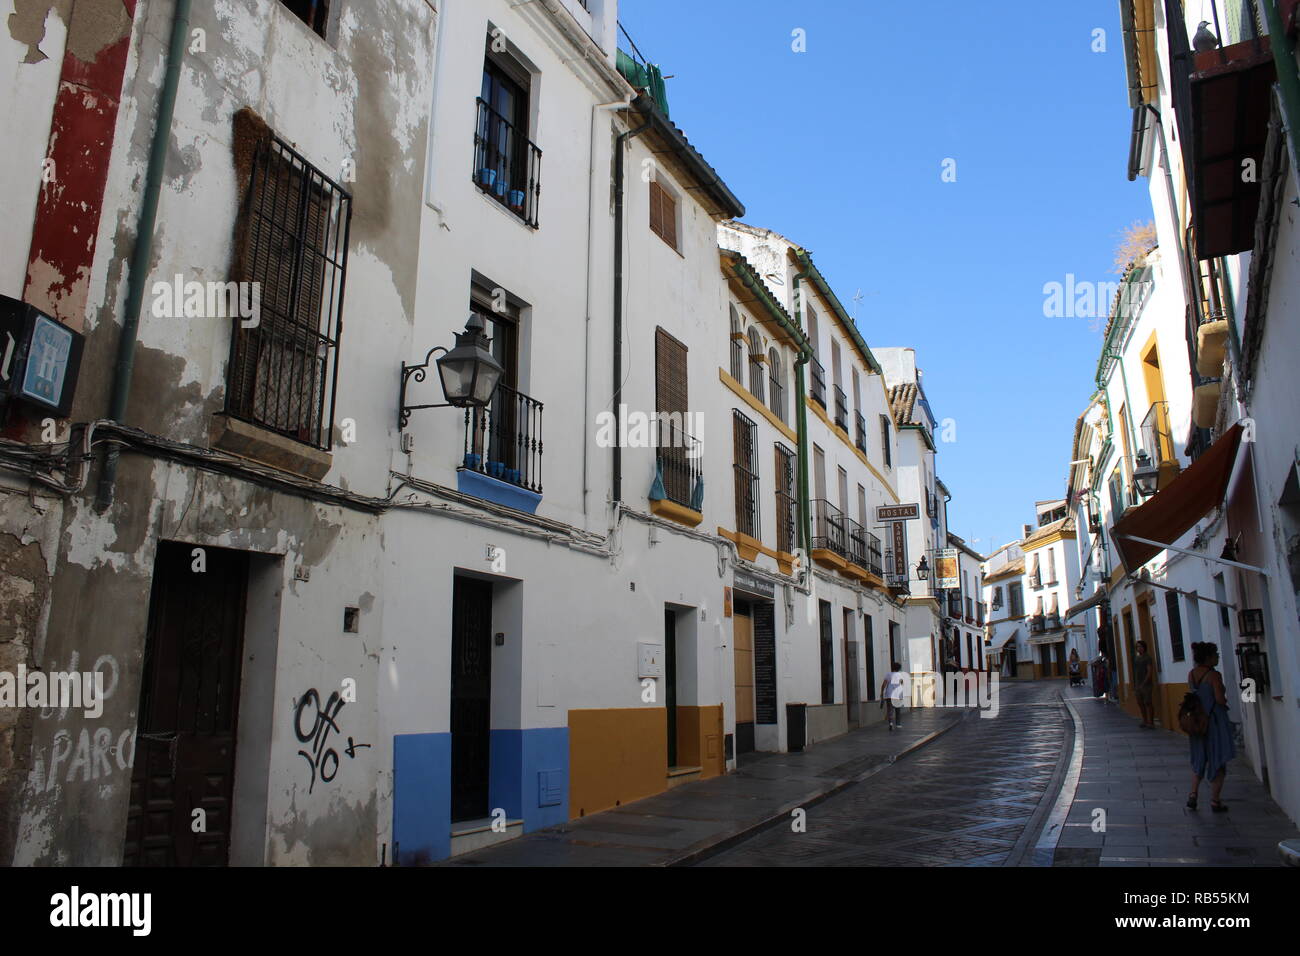 A classic Spanish styled street in Cordoba, Andalusia, Spain, presenting white buildings and Spanish architecture Stock Photo